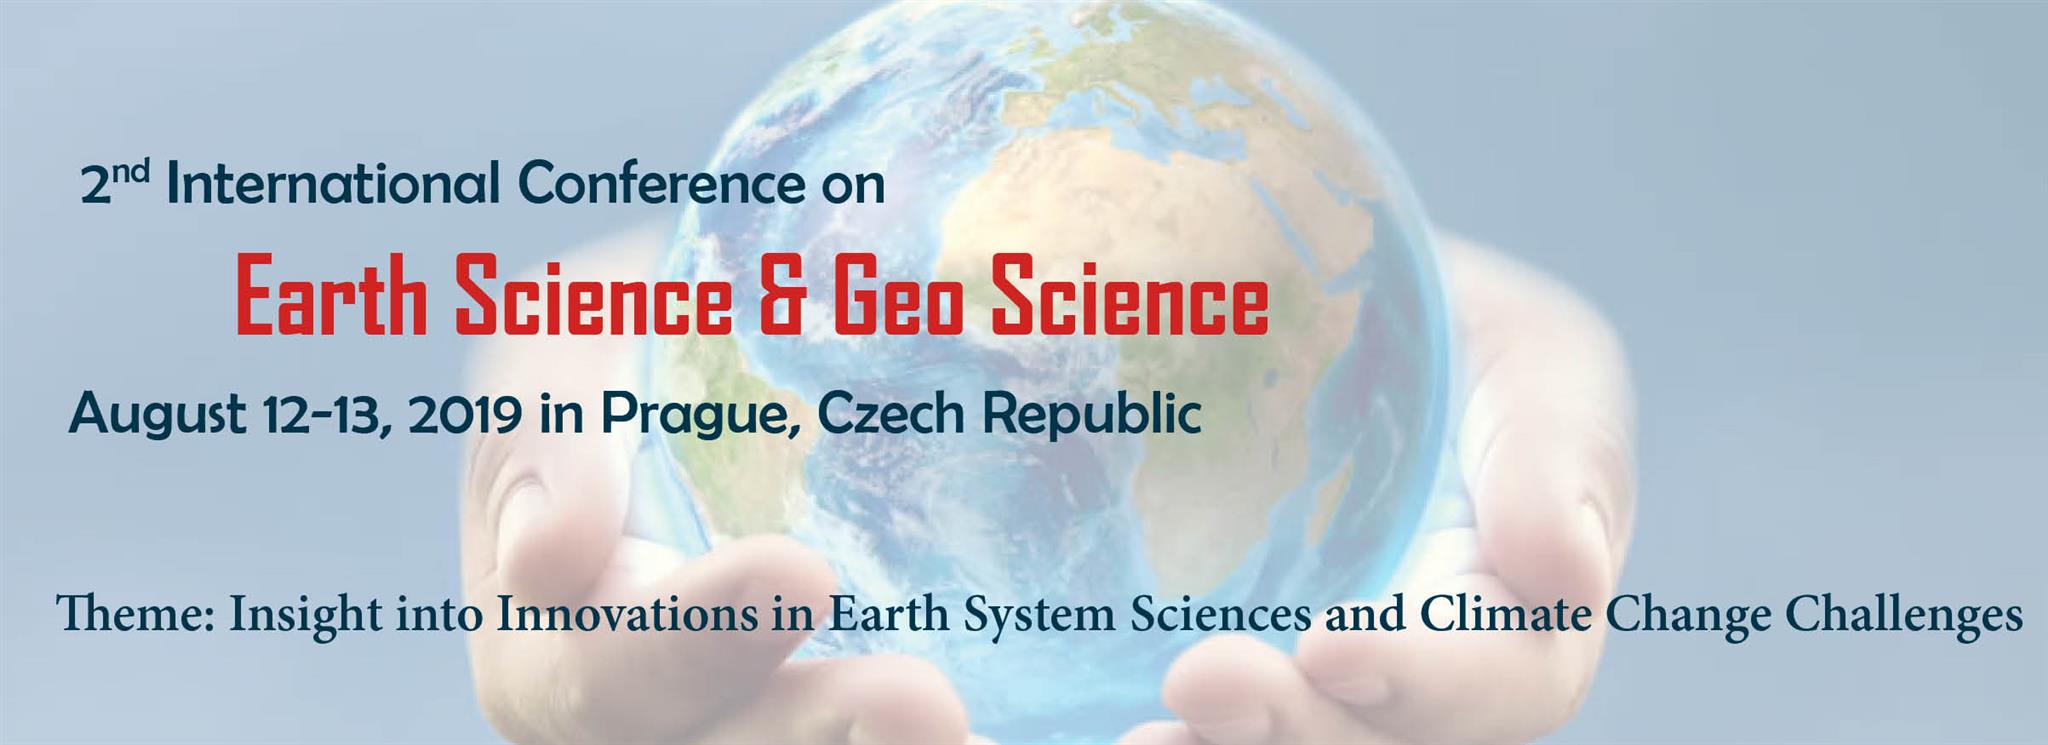 2nd International Conference on Earth Science & Geo Science-2019